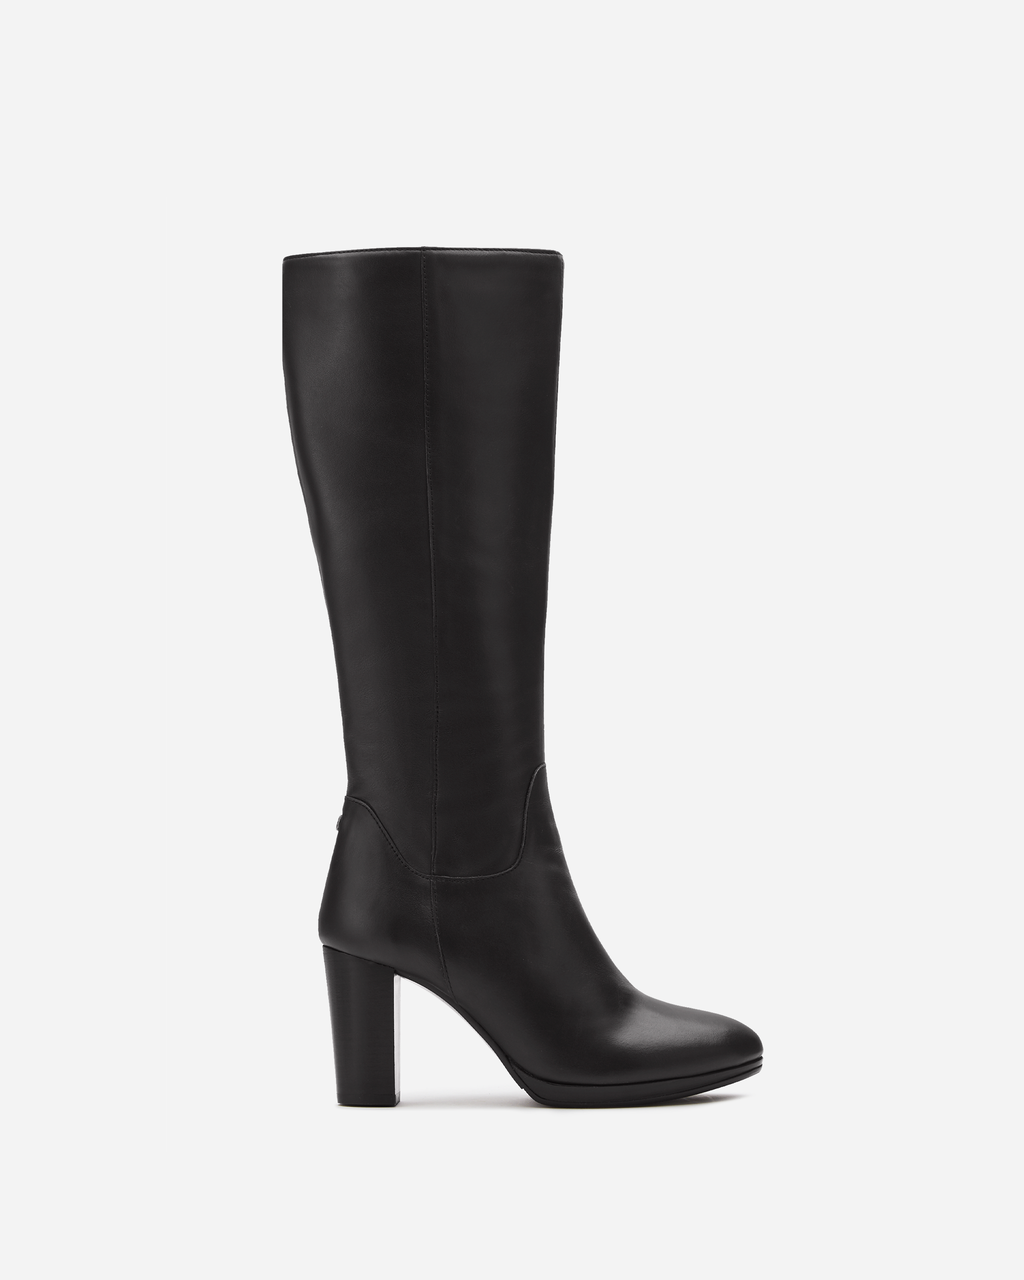 Belmore Knee High Boots in Black Leather – DuoBoots